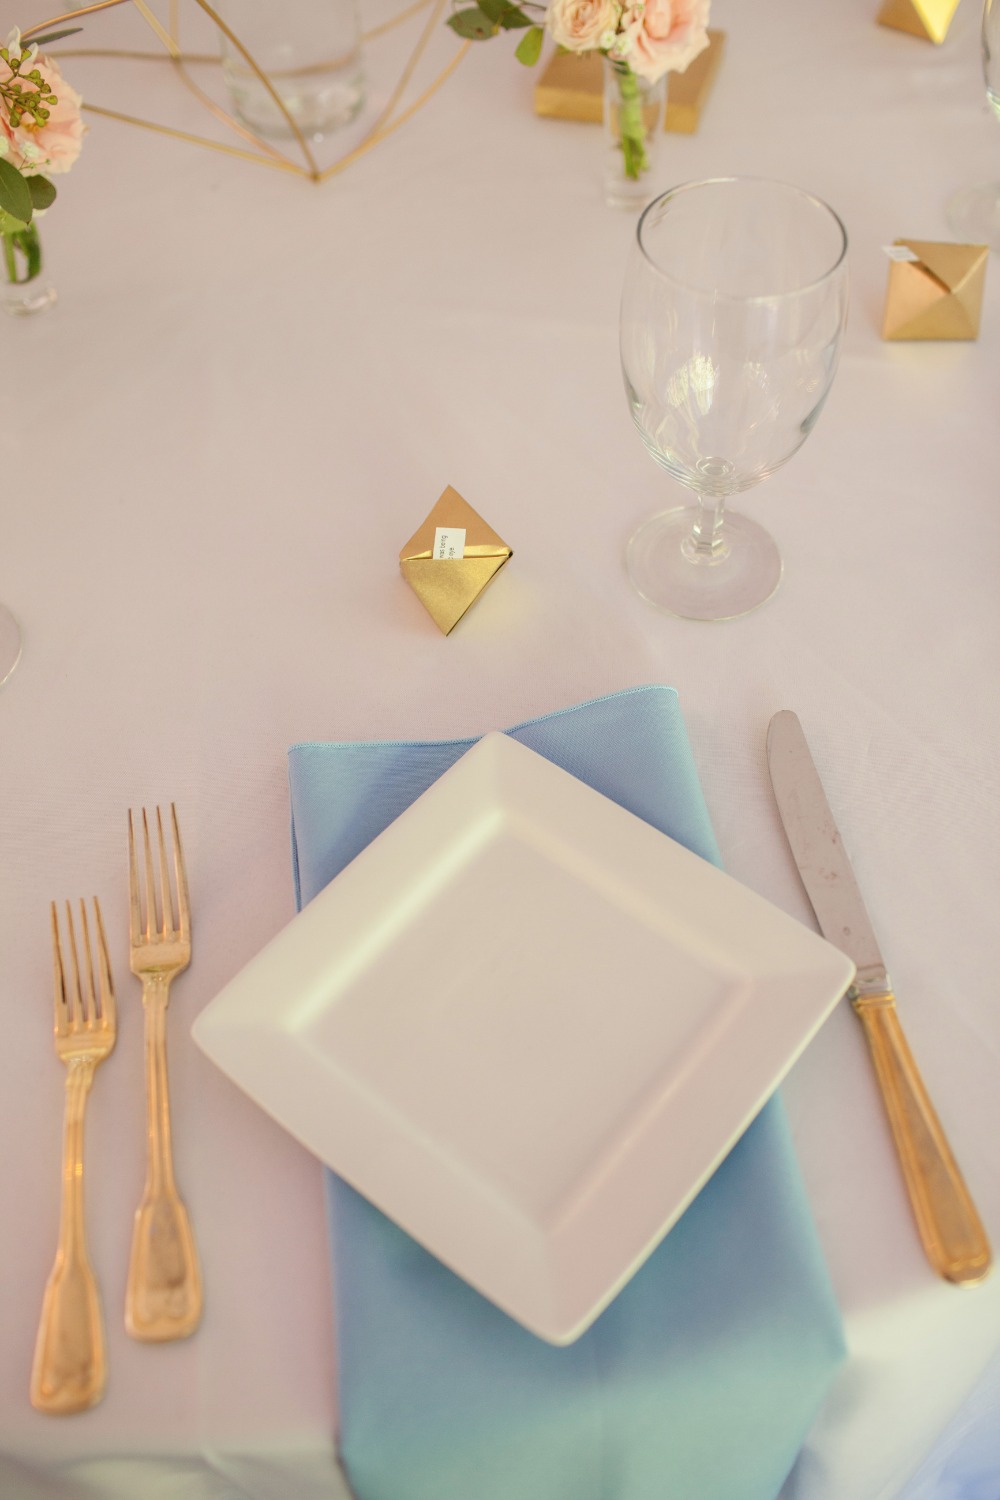 Blue, white and gold table setting ideas